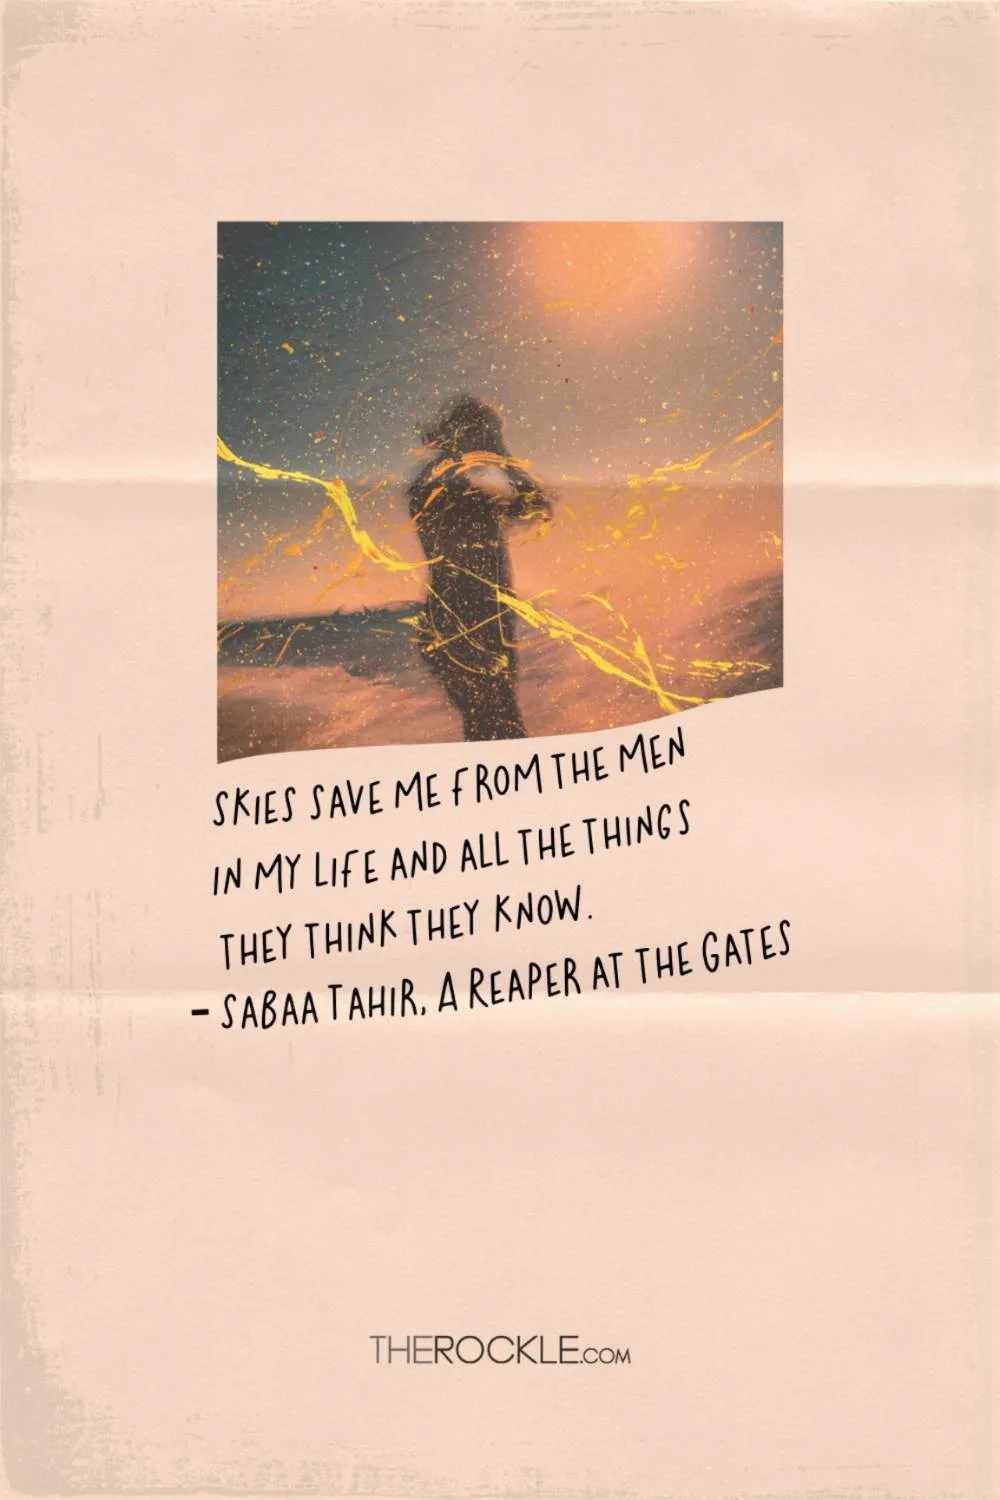 Quote from Sabaa Tahir's book A Reaper at the Gates